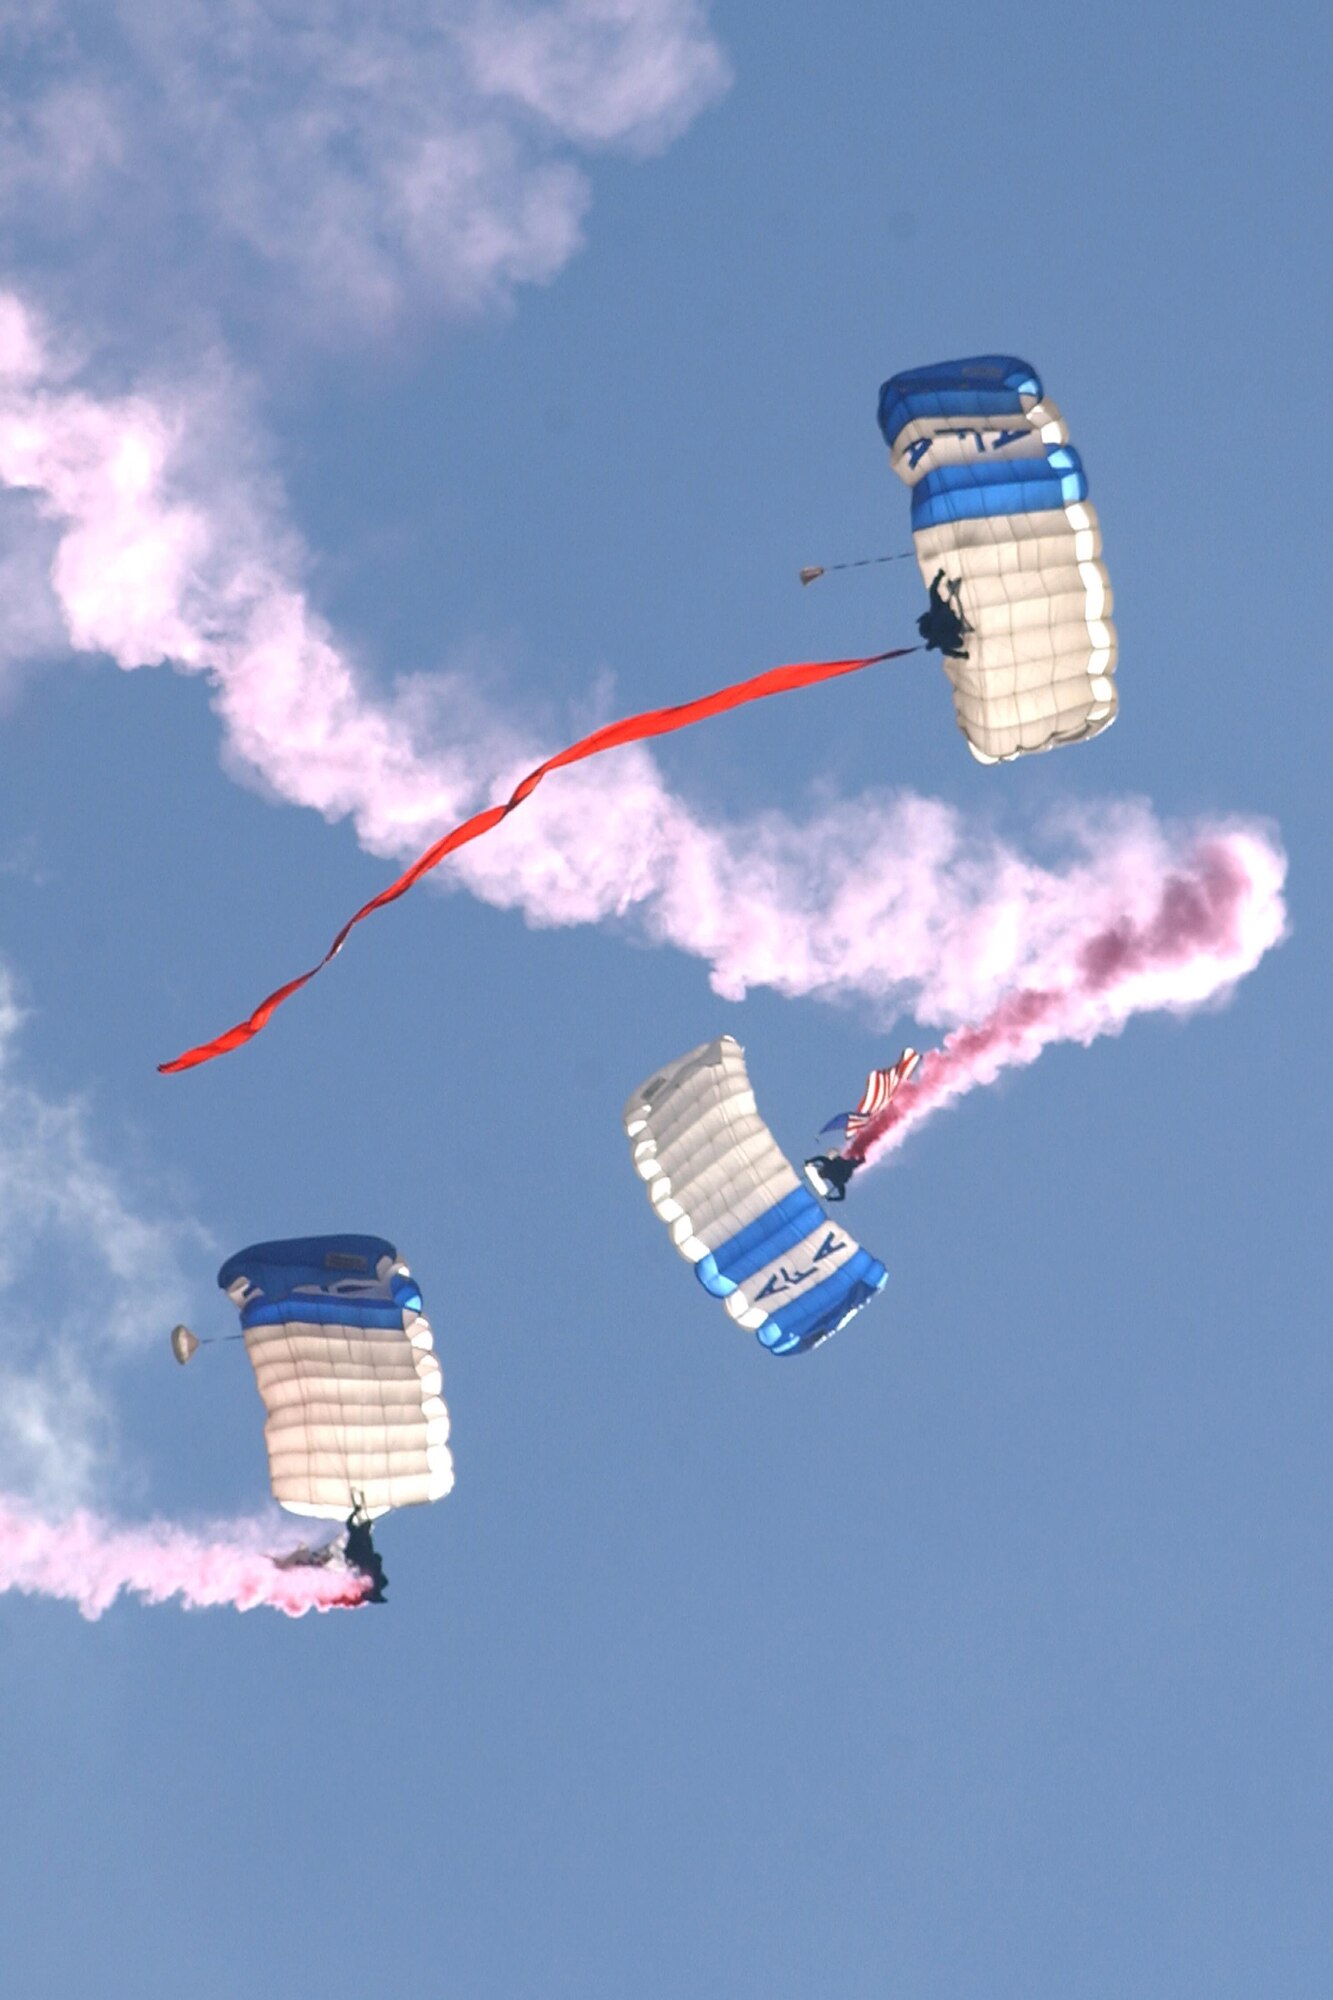 Wings of Blue team members parachute in to a Falcon Stadium home game during pregame ceremonies at the U.S. Air Force Academy. The Academy parachute team will bring in the U.S. flags at the Texas Rangers home opener in Arlington, Texas, April 3, 2017. (U.S. Air Force photo/John Van Winkle)

